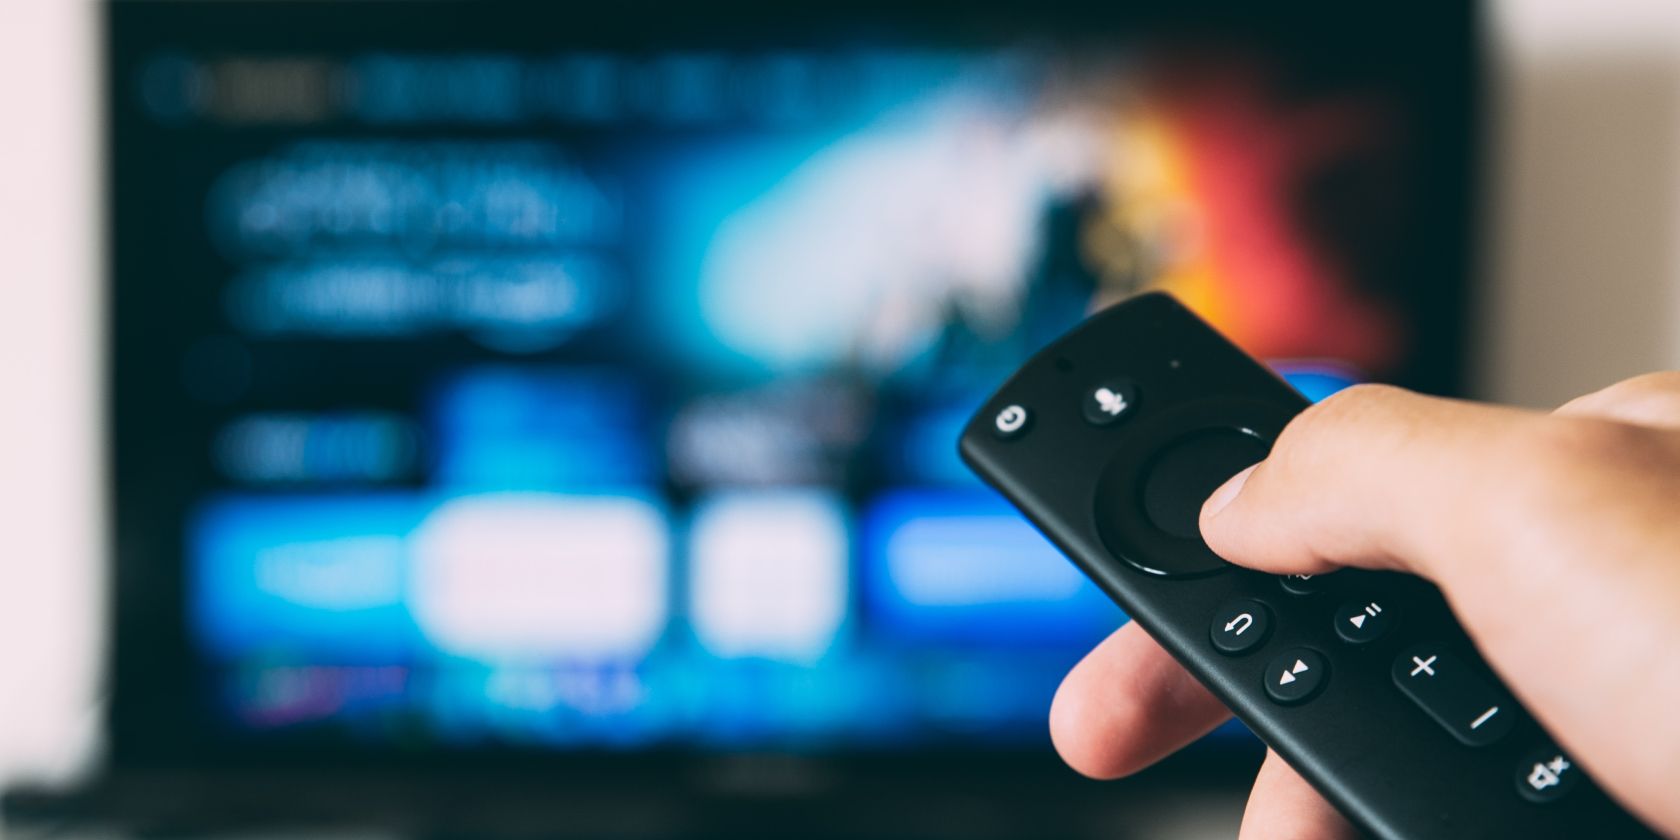 tv remote in front of a blurred TV display